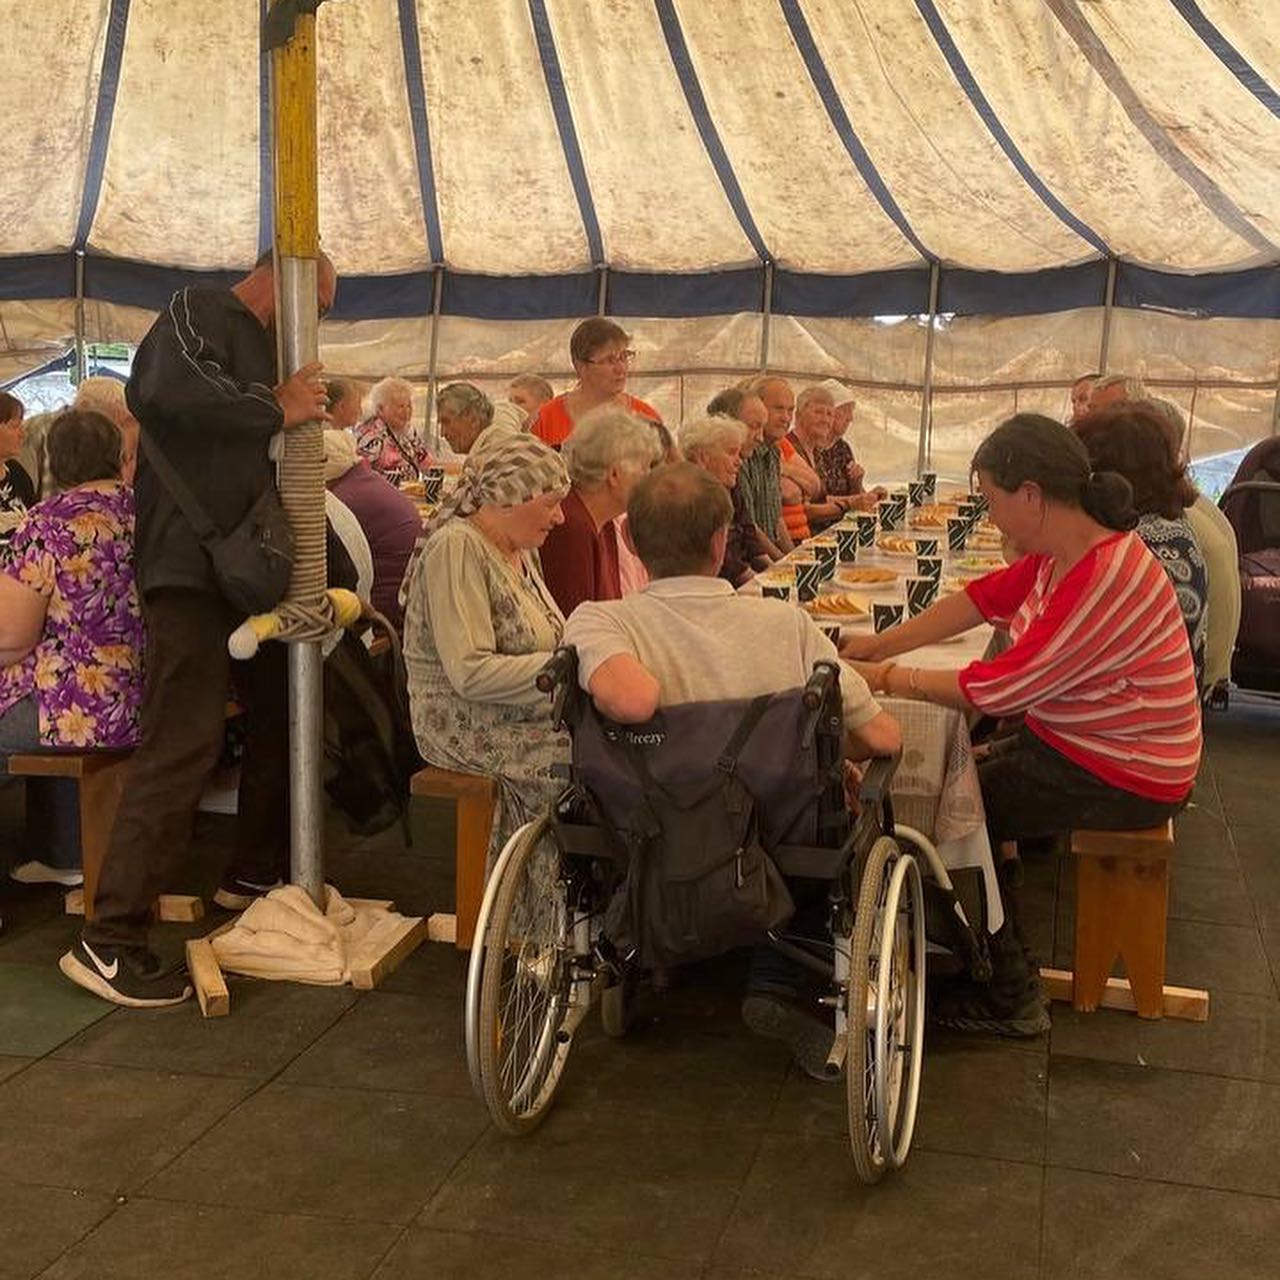 a group of people sitting at tables under a tent.